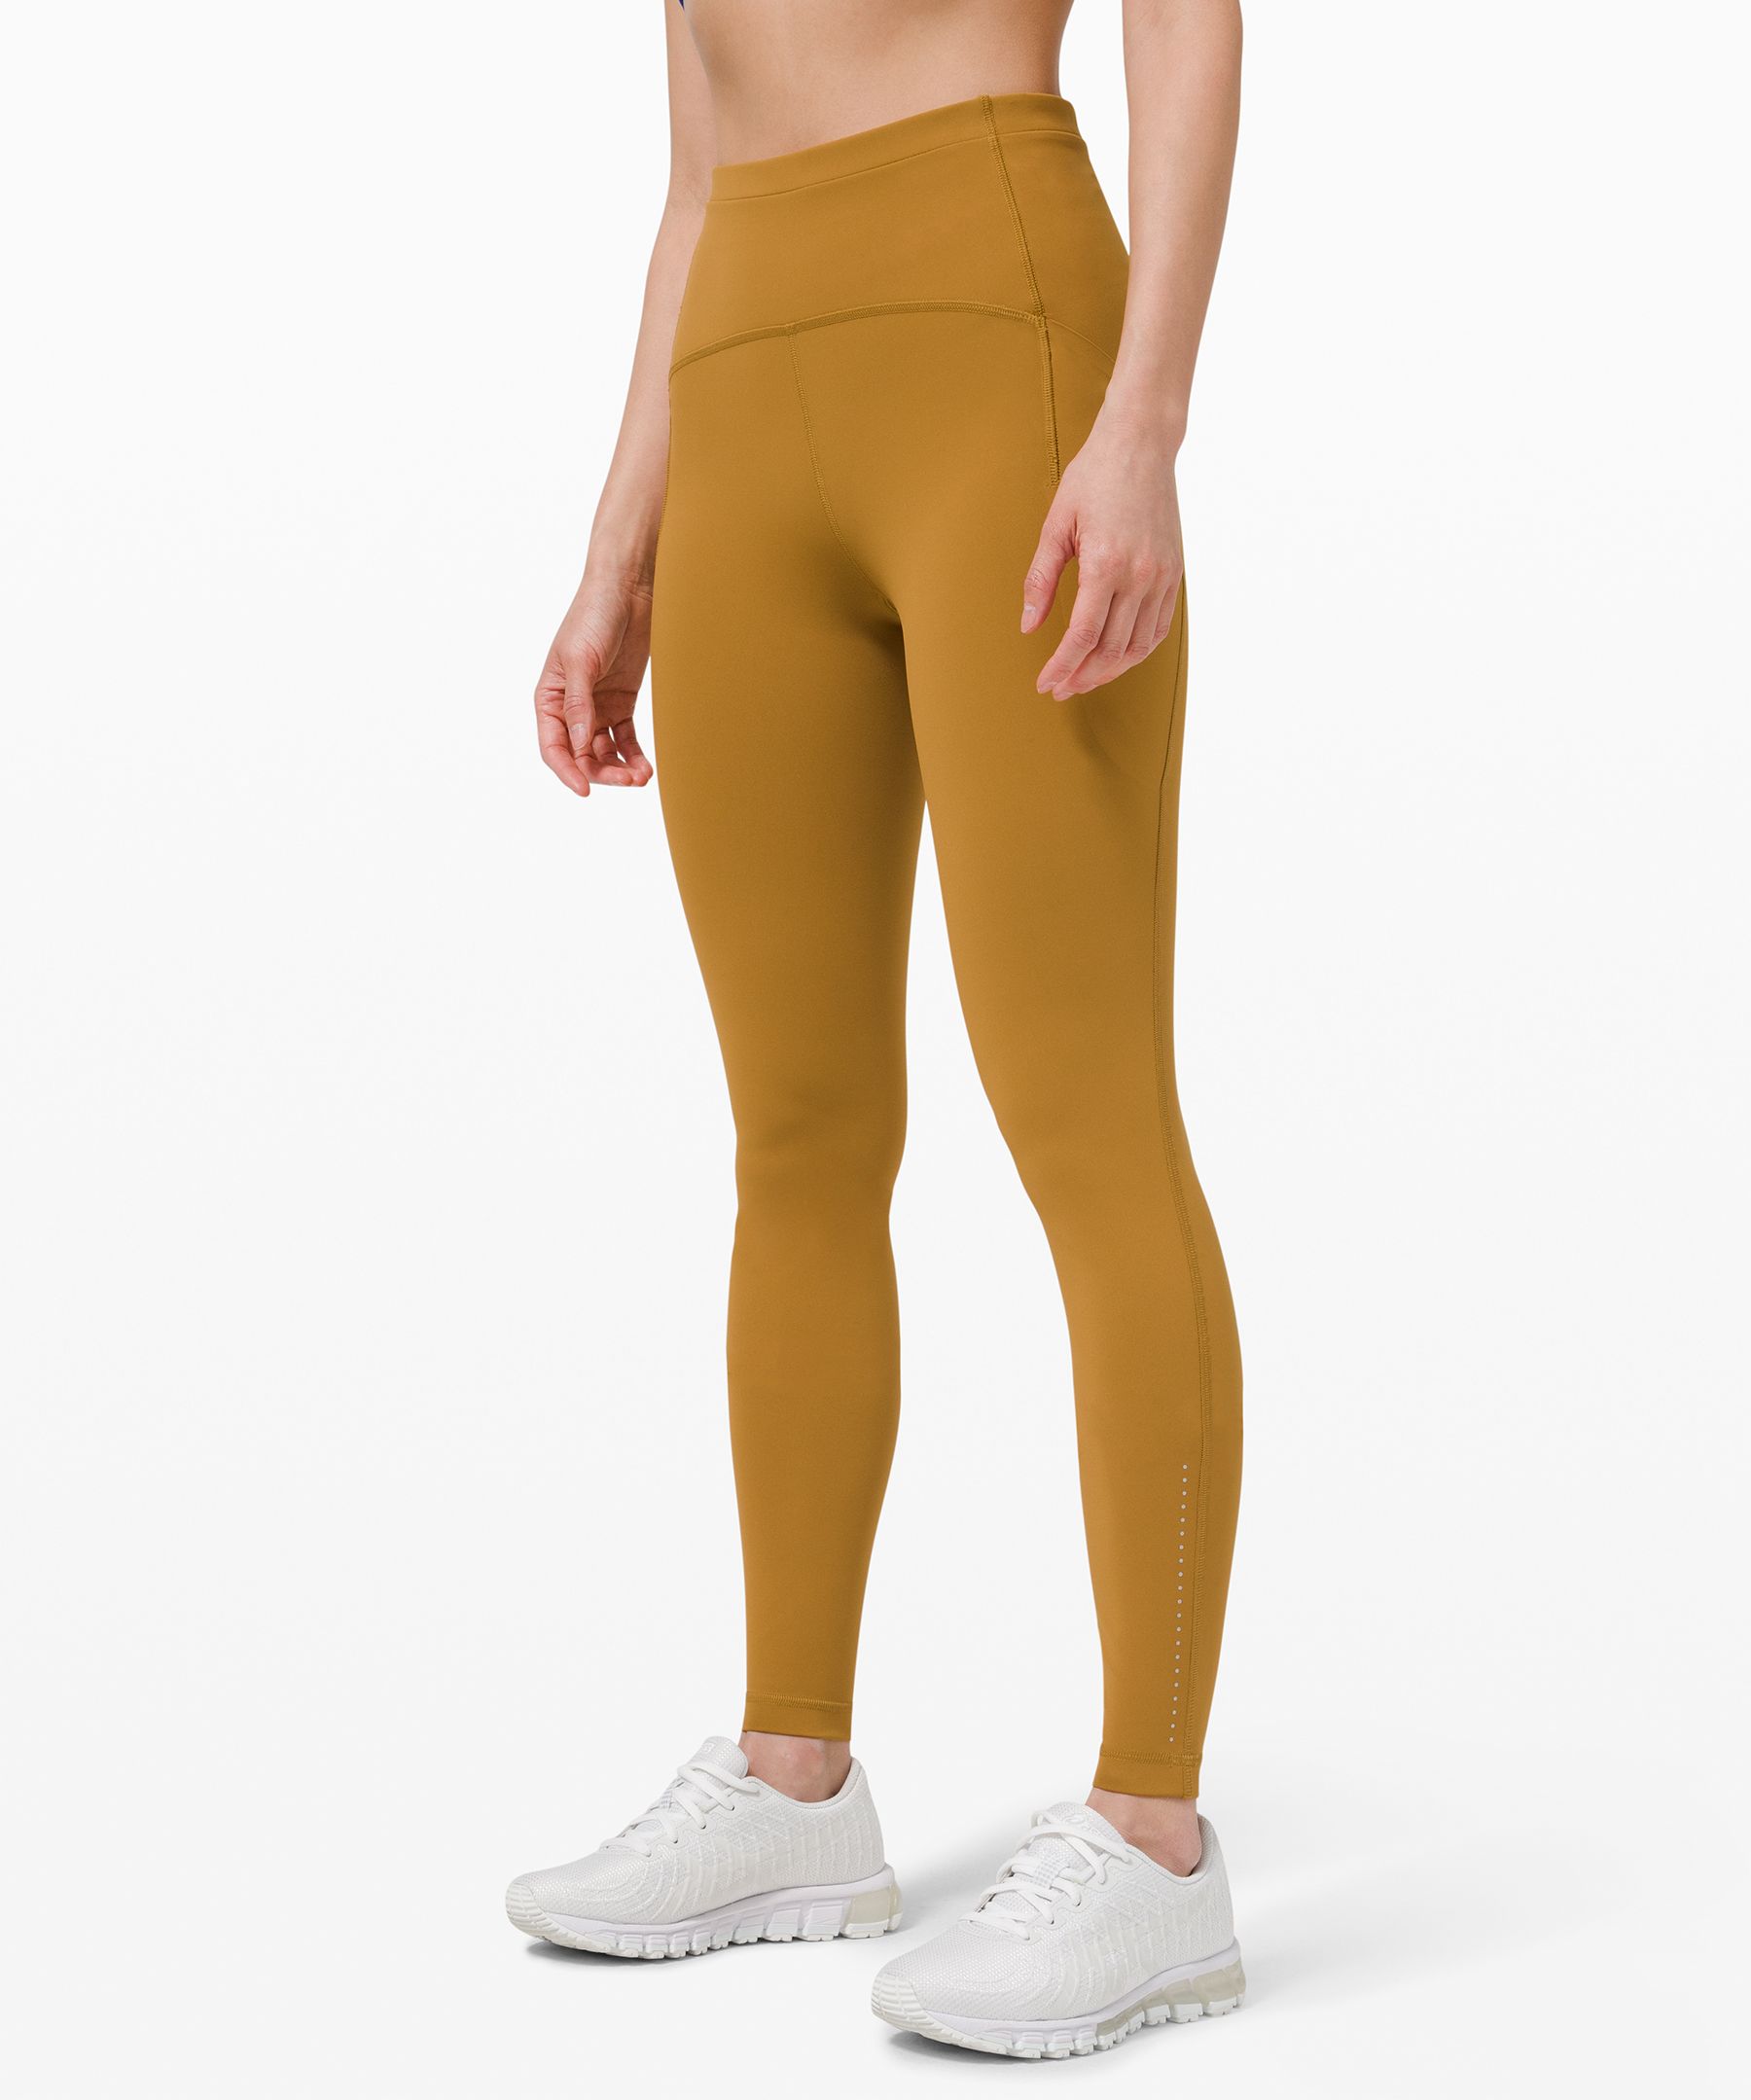 Lululemon Swift Speed High-rise Tights 28" In Spiced Bronze